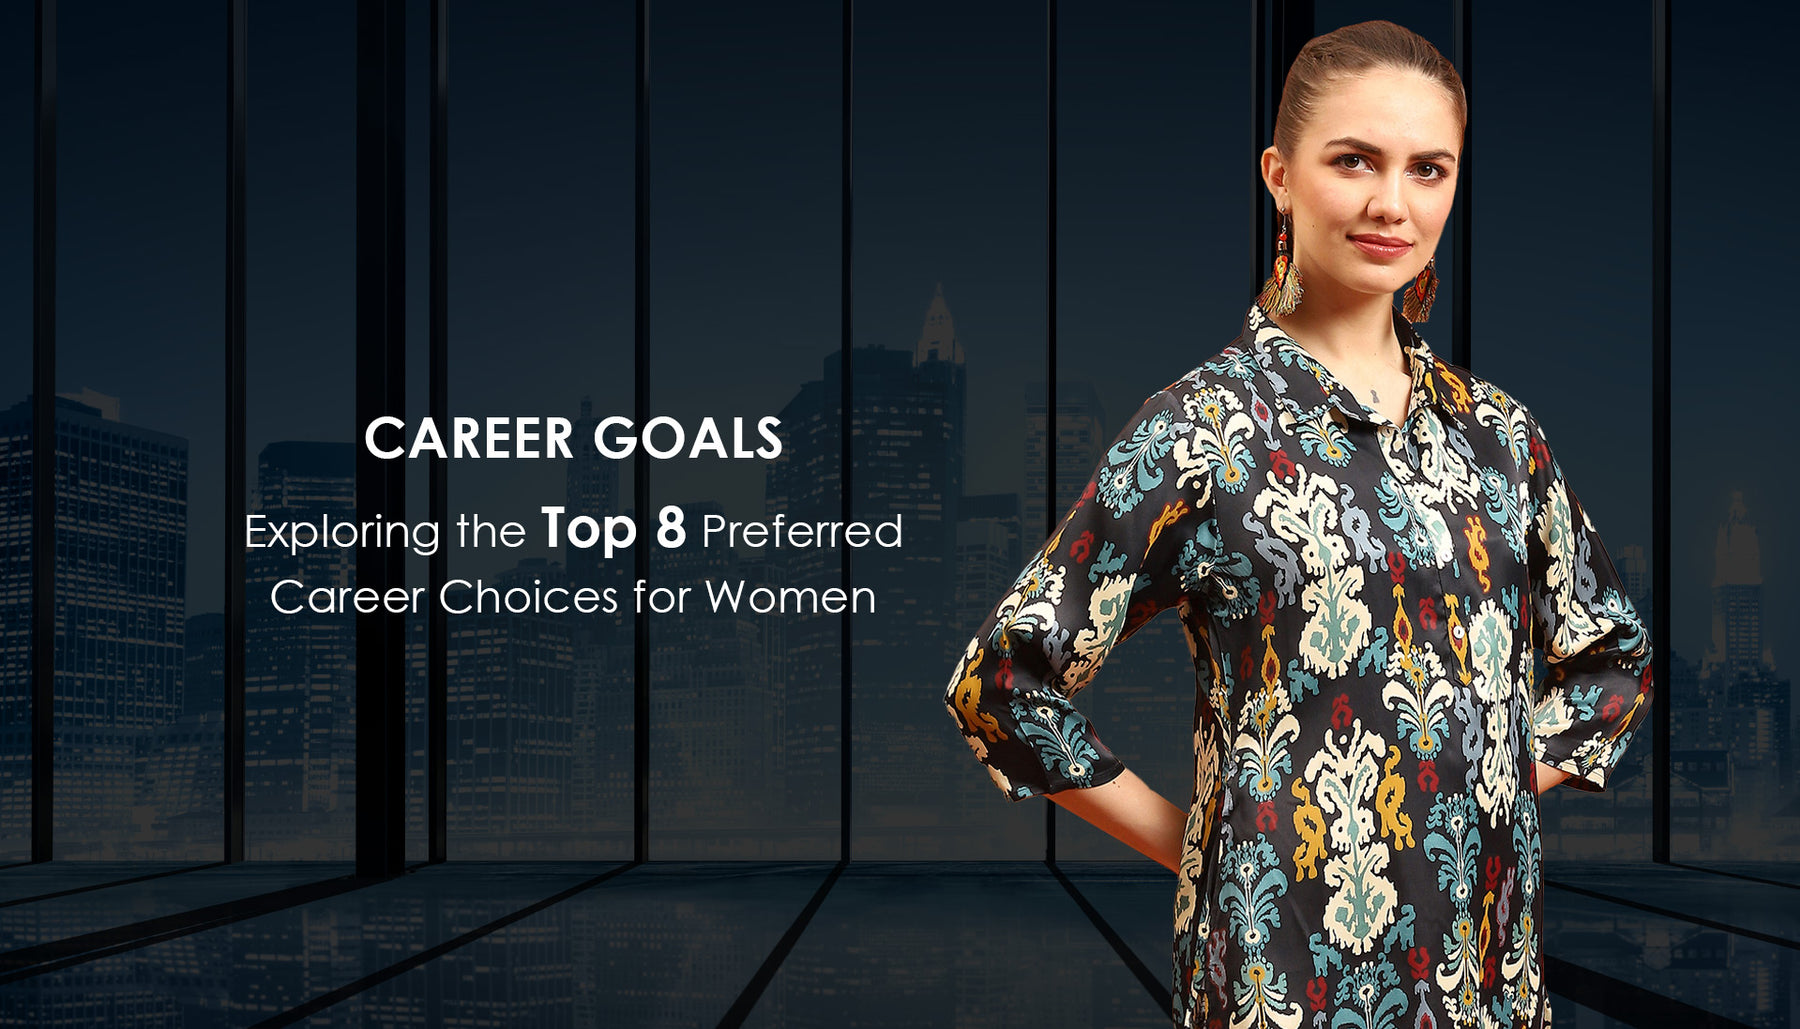 Exploring the Top 8 Preferred Career Choices for Women